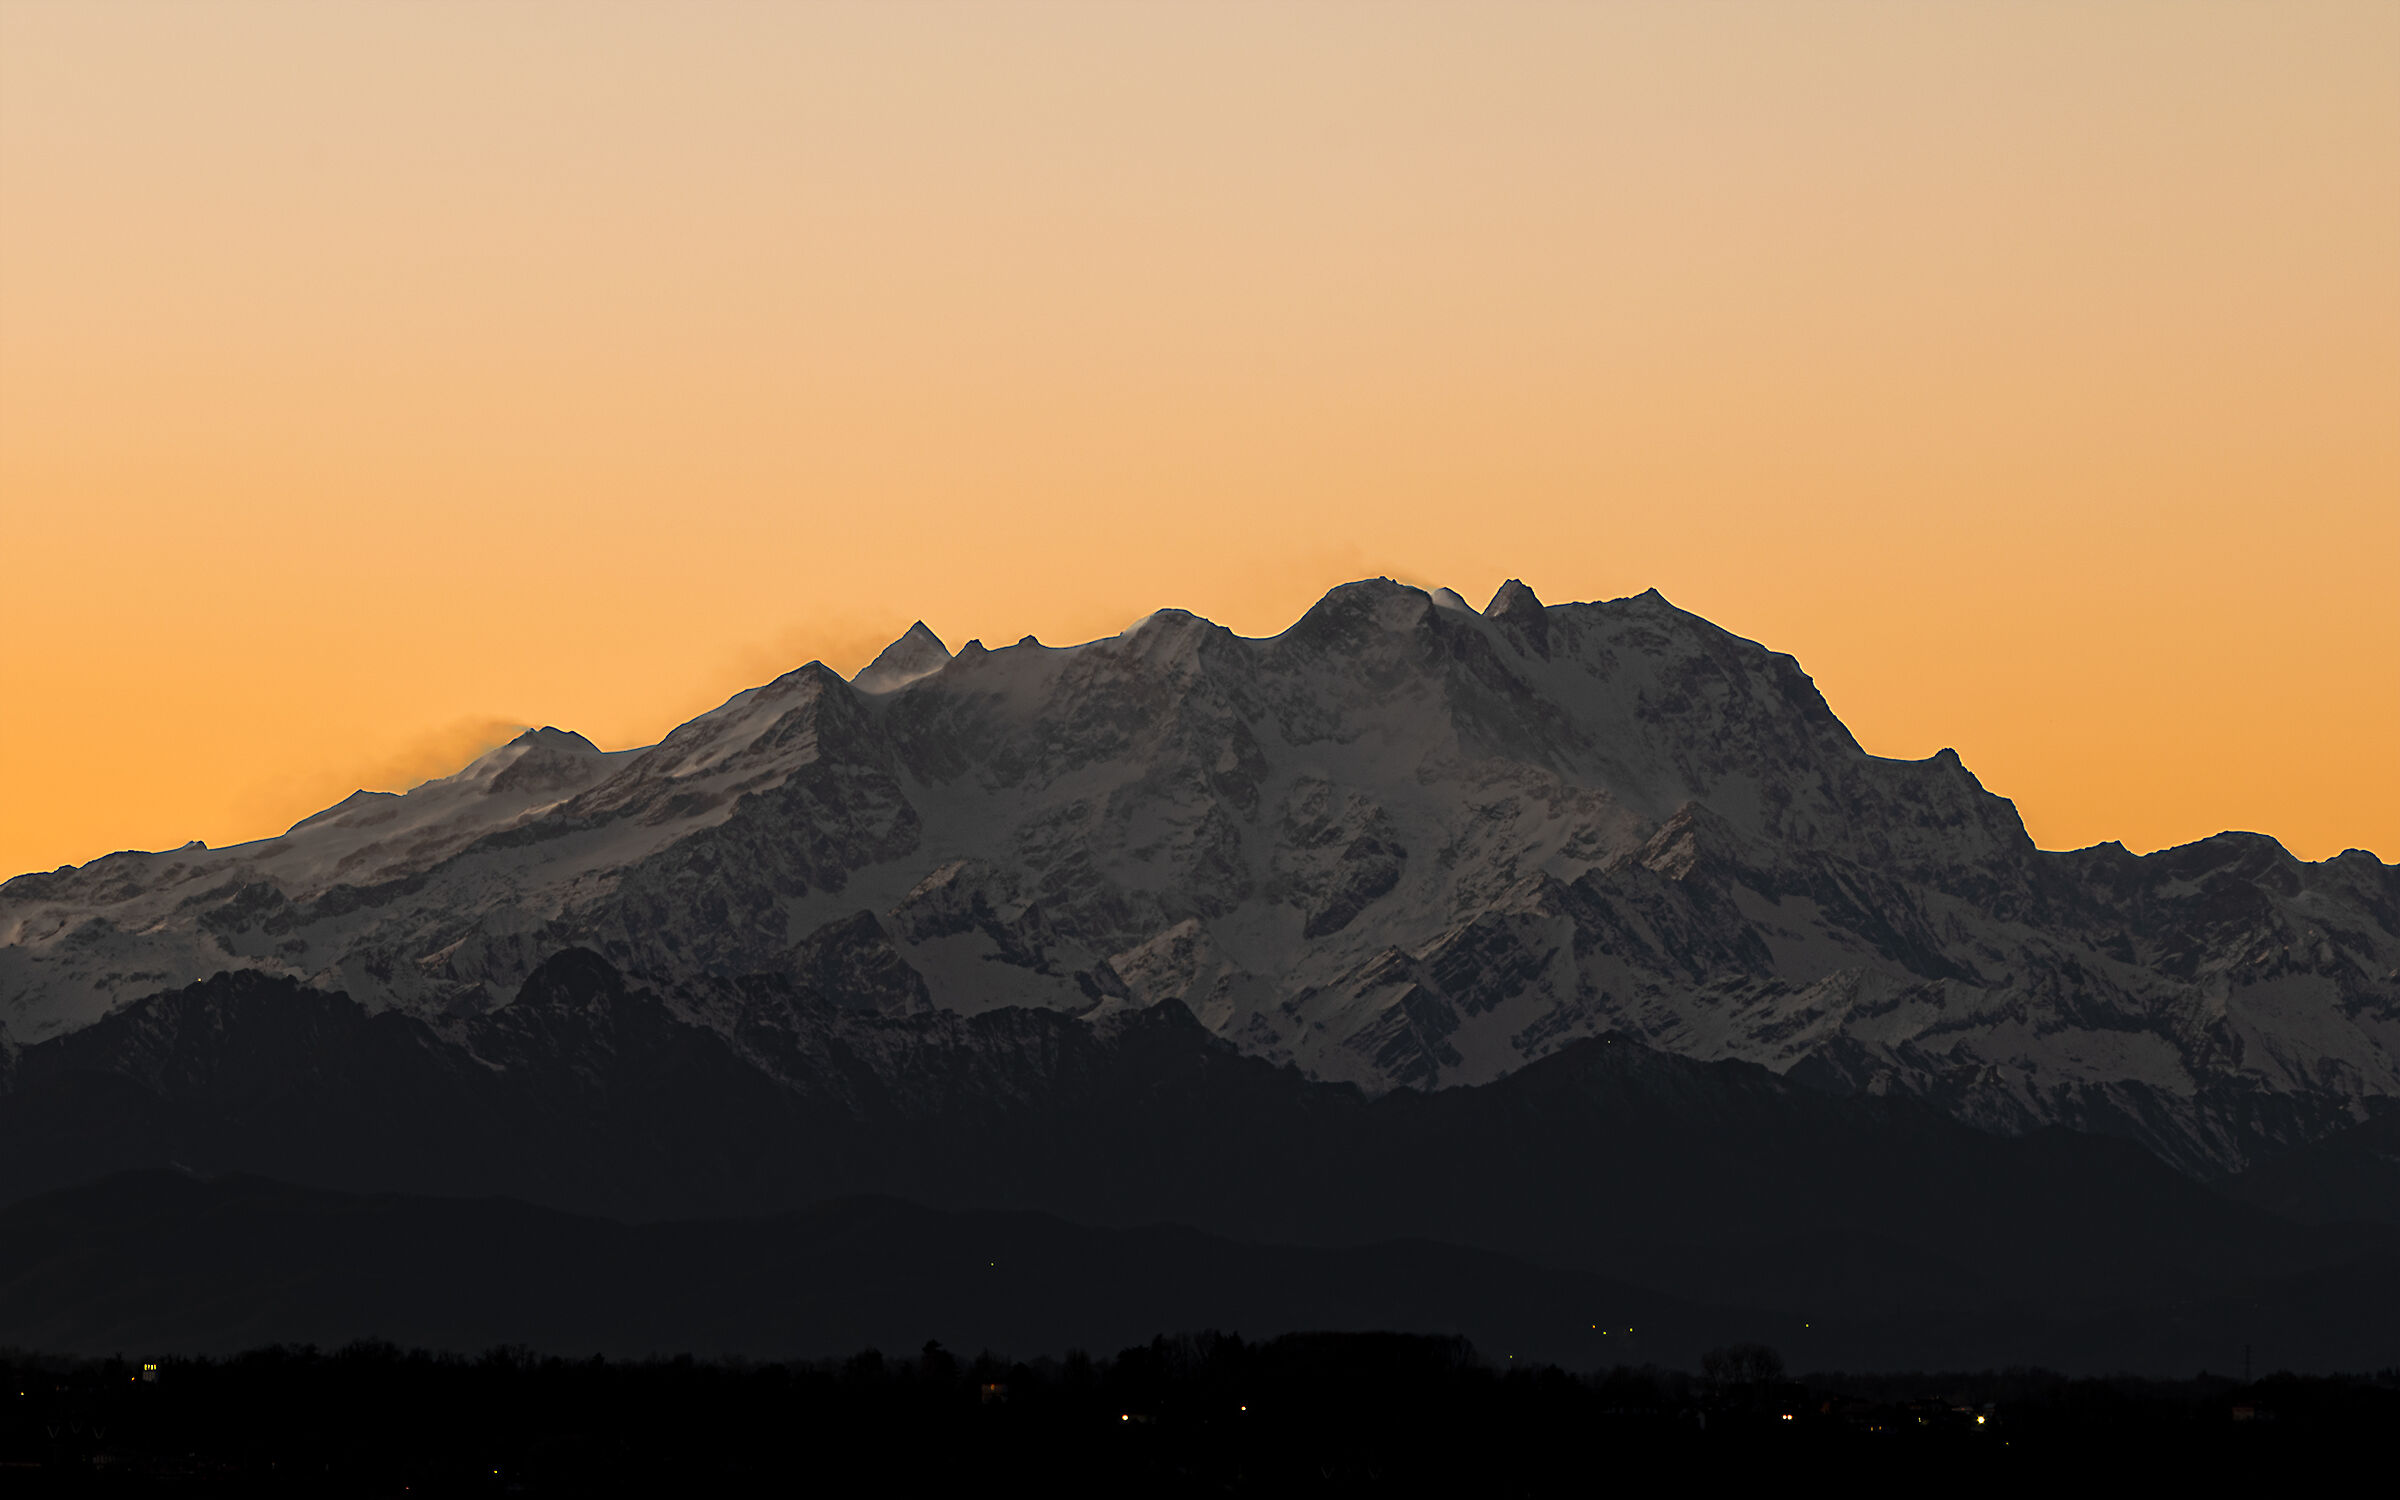 Monte Rosa at sunset...